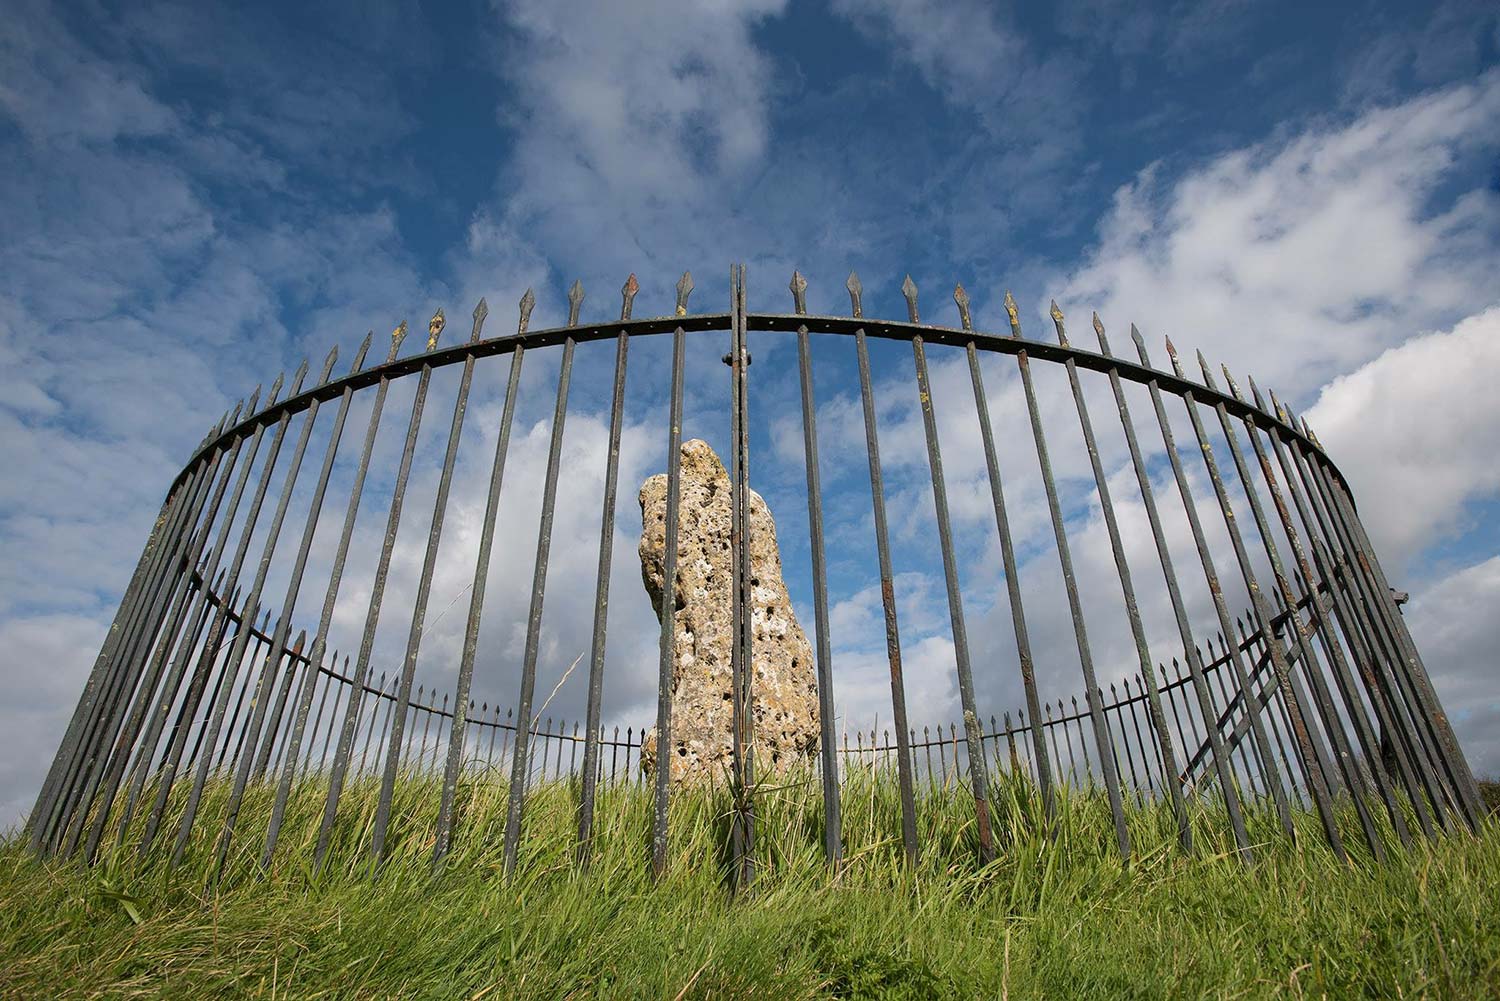 The King’s Stone at the Rollright Stones on the border of Warwickshire and Oxfordshire